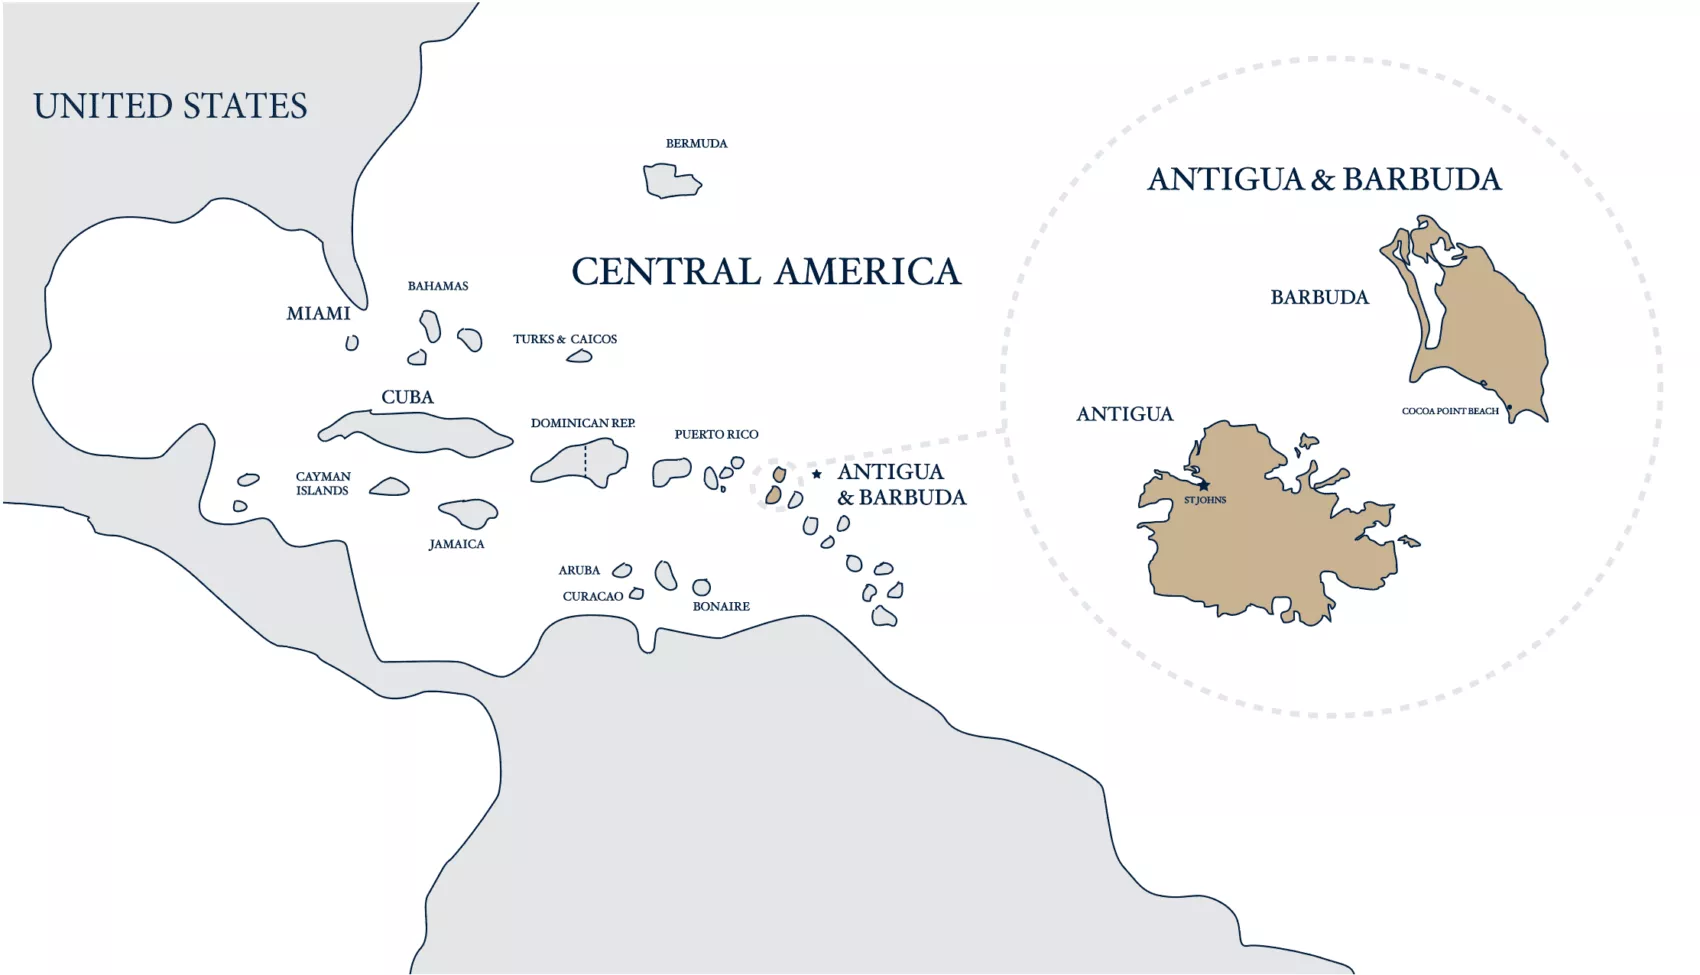 Antigua and Barbuda - Citizenship by Investment - Savory and Partners